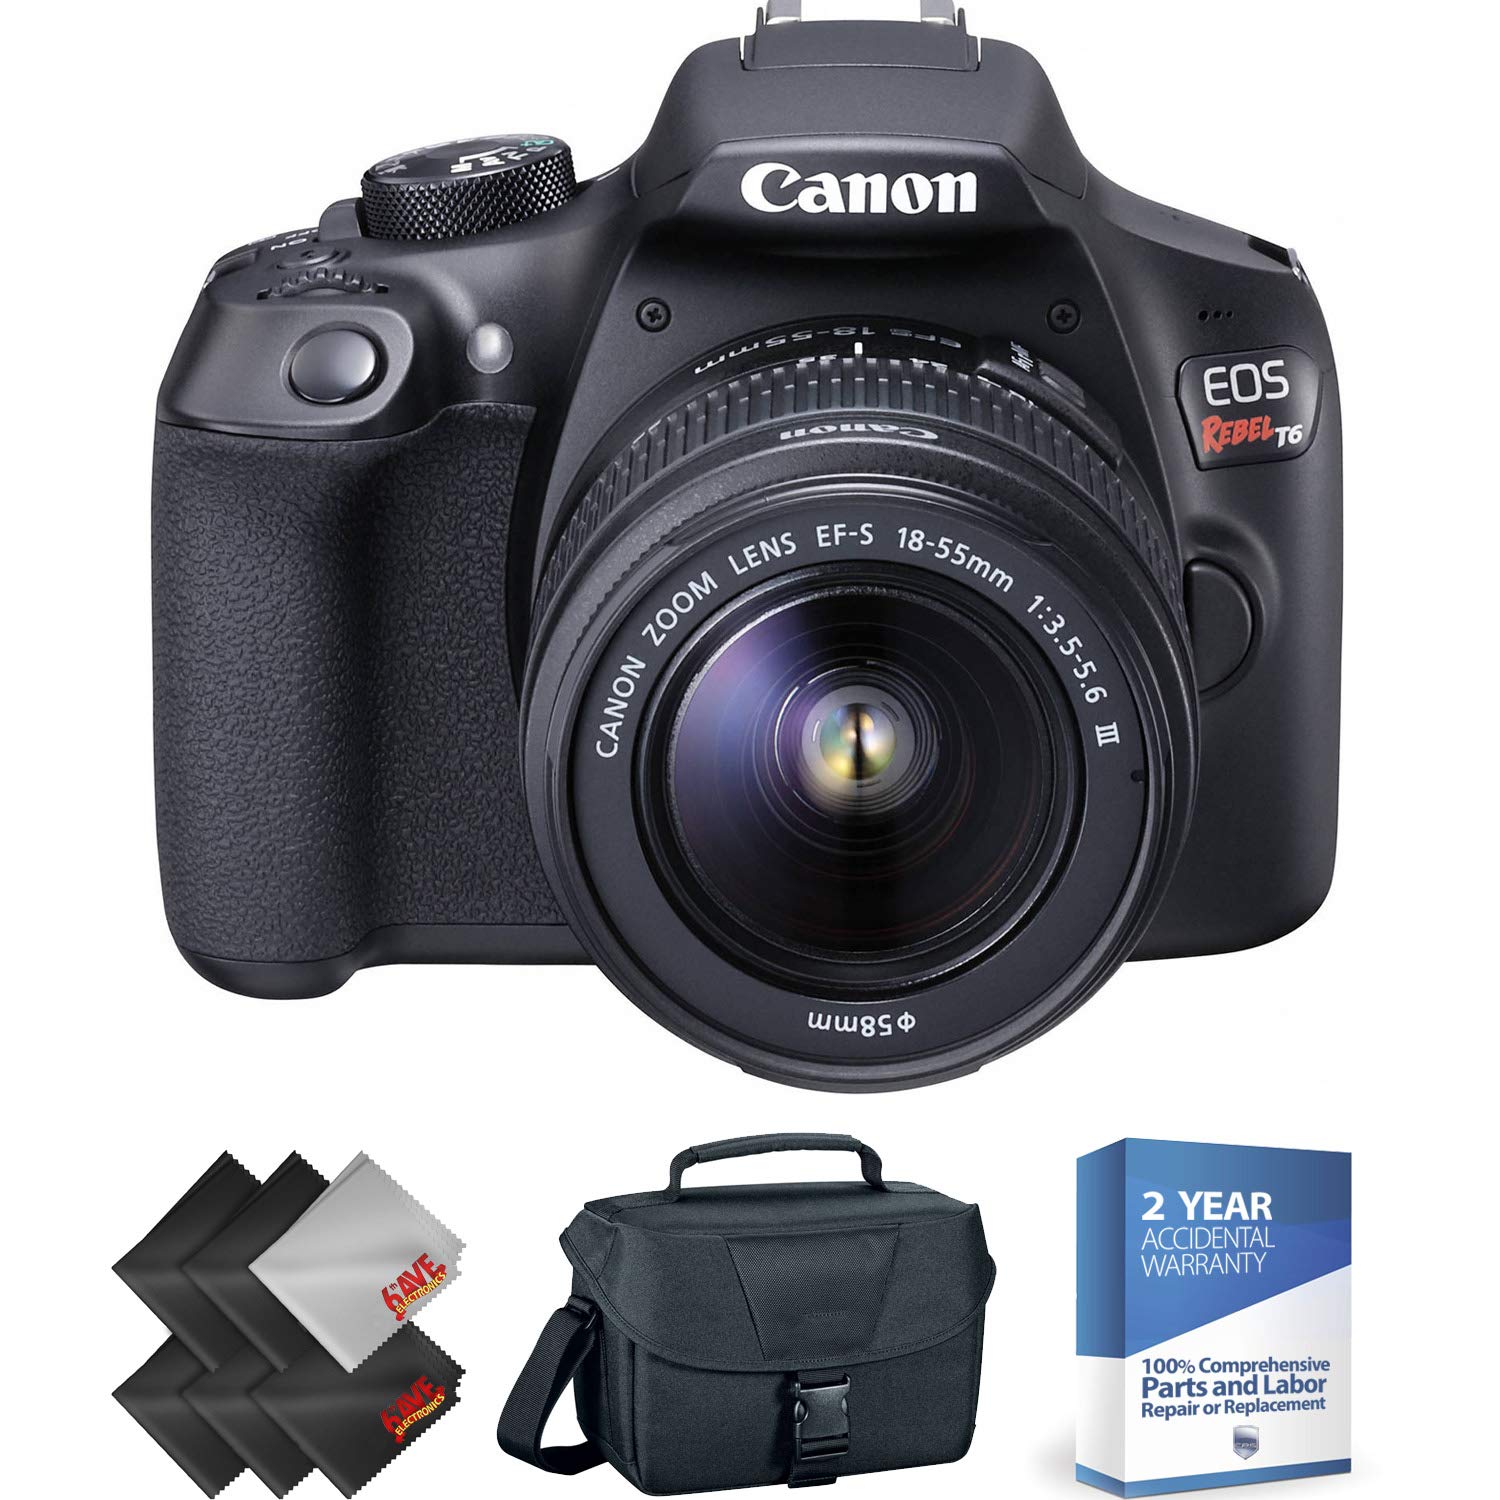 Canon EOS Rebel T6 DSLR Camera with 18-55mm and 75-300mm Lenses Kit + 2 Year Accidental Warranty Bundle